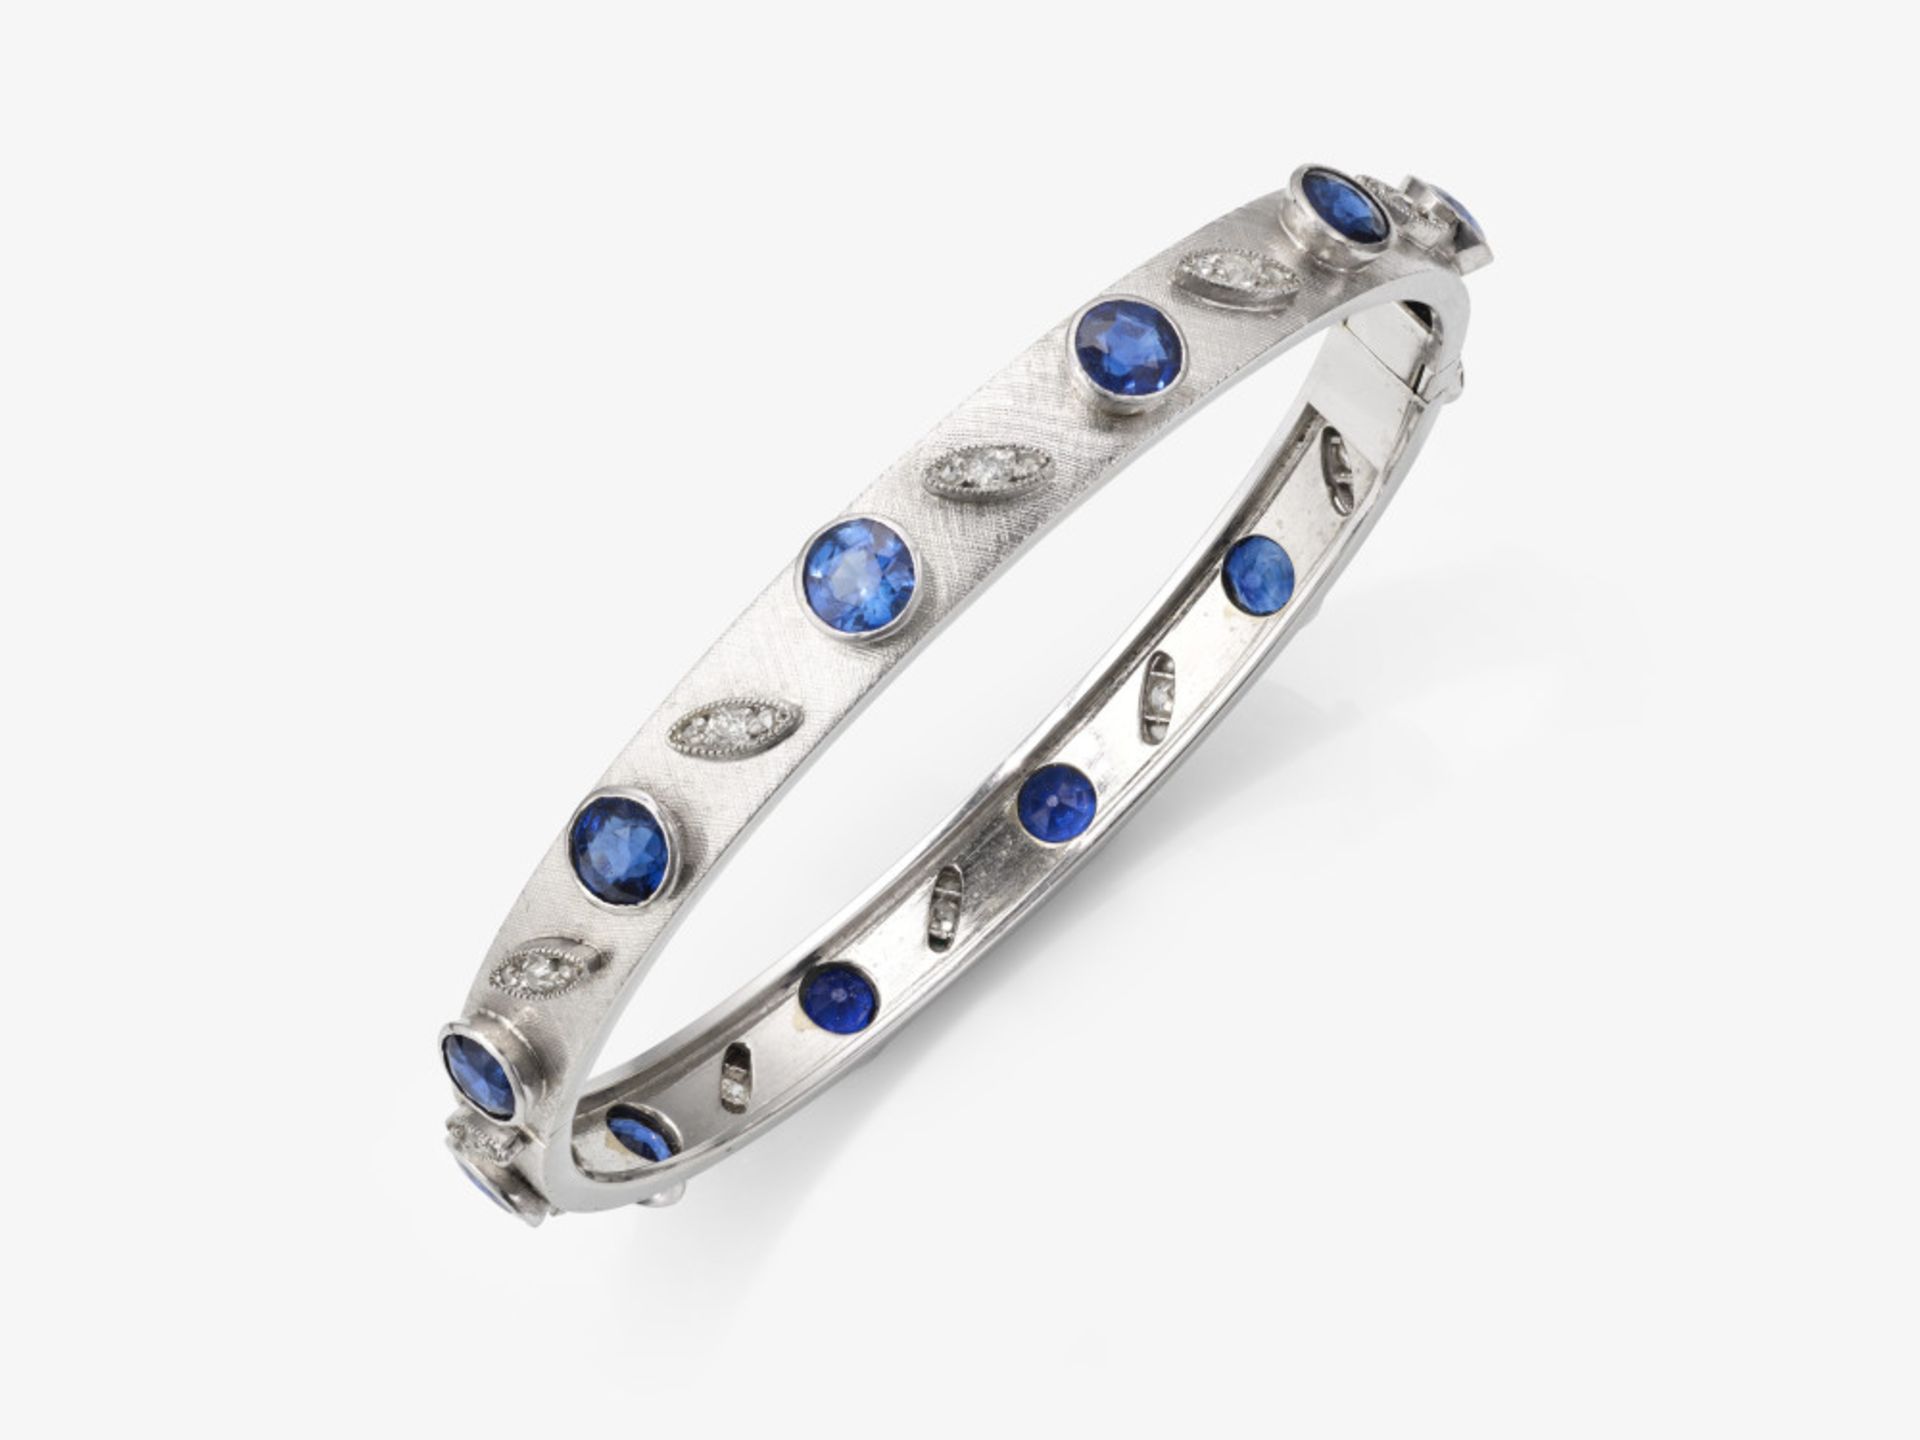 A bangle decorated with sapphires and diamonds - Germany, 1920s - 1930s 